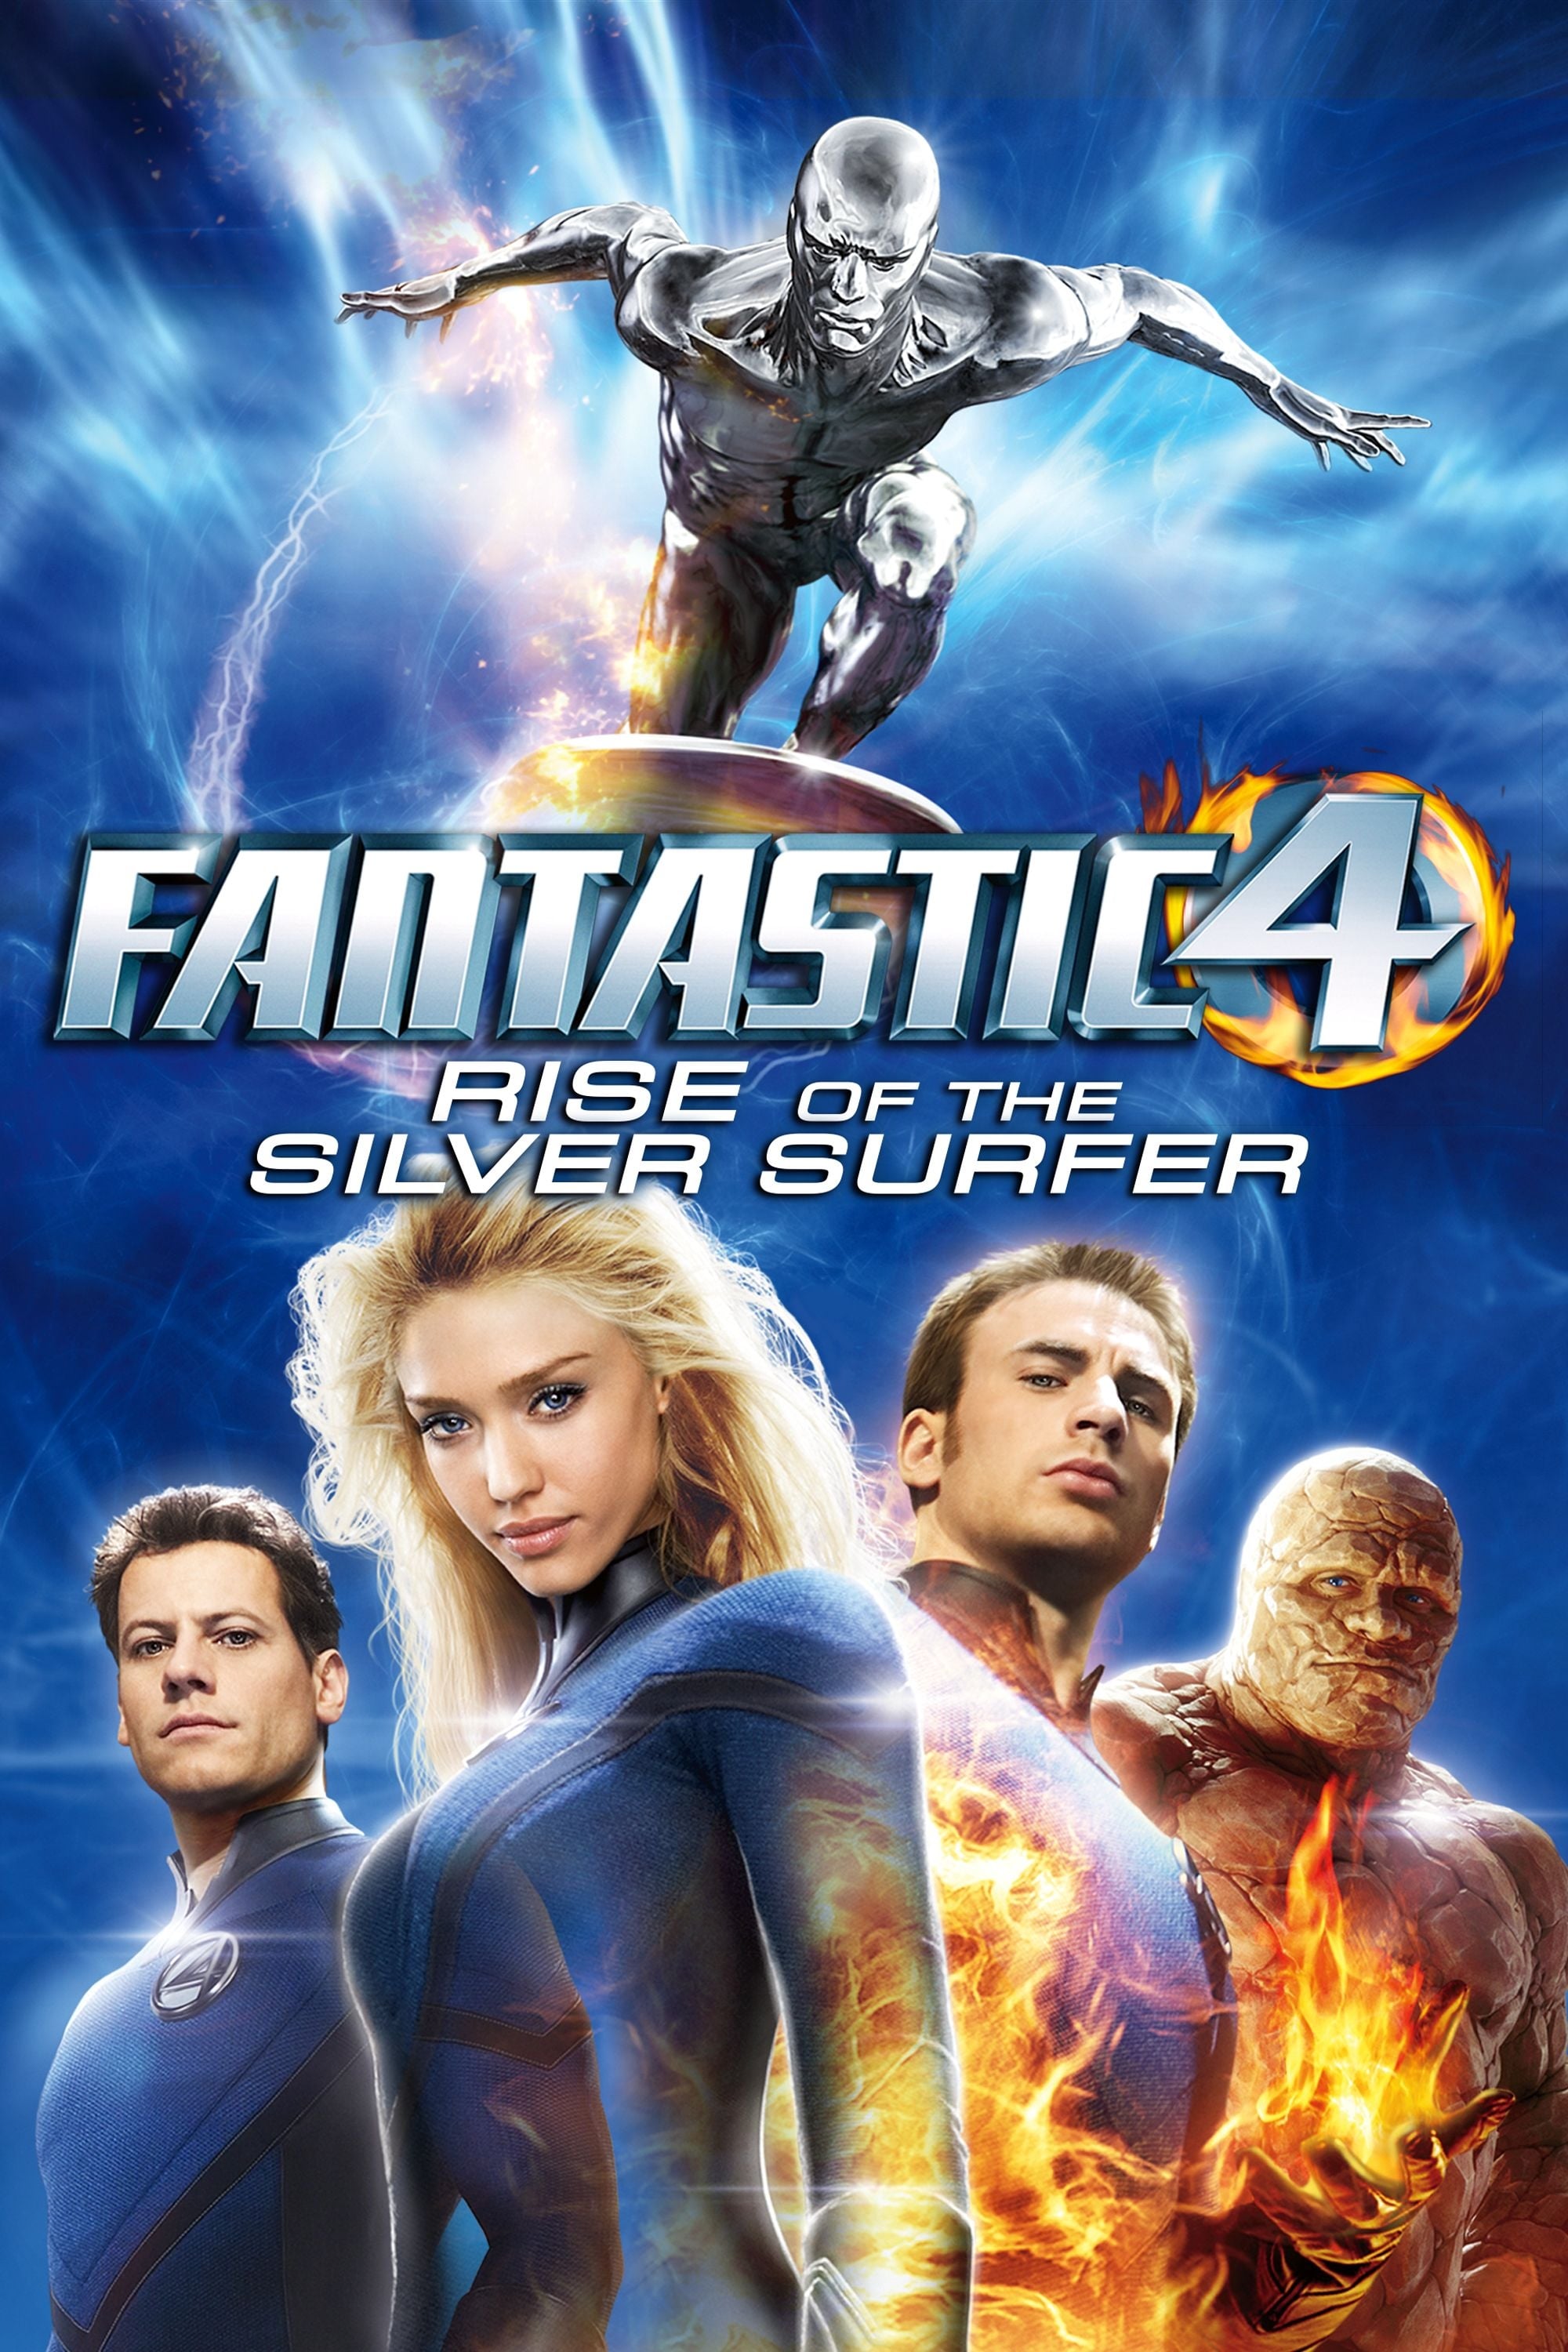 Image for movie Fantastic Four: Rise of the Silver Surfer